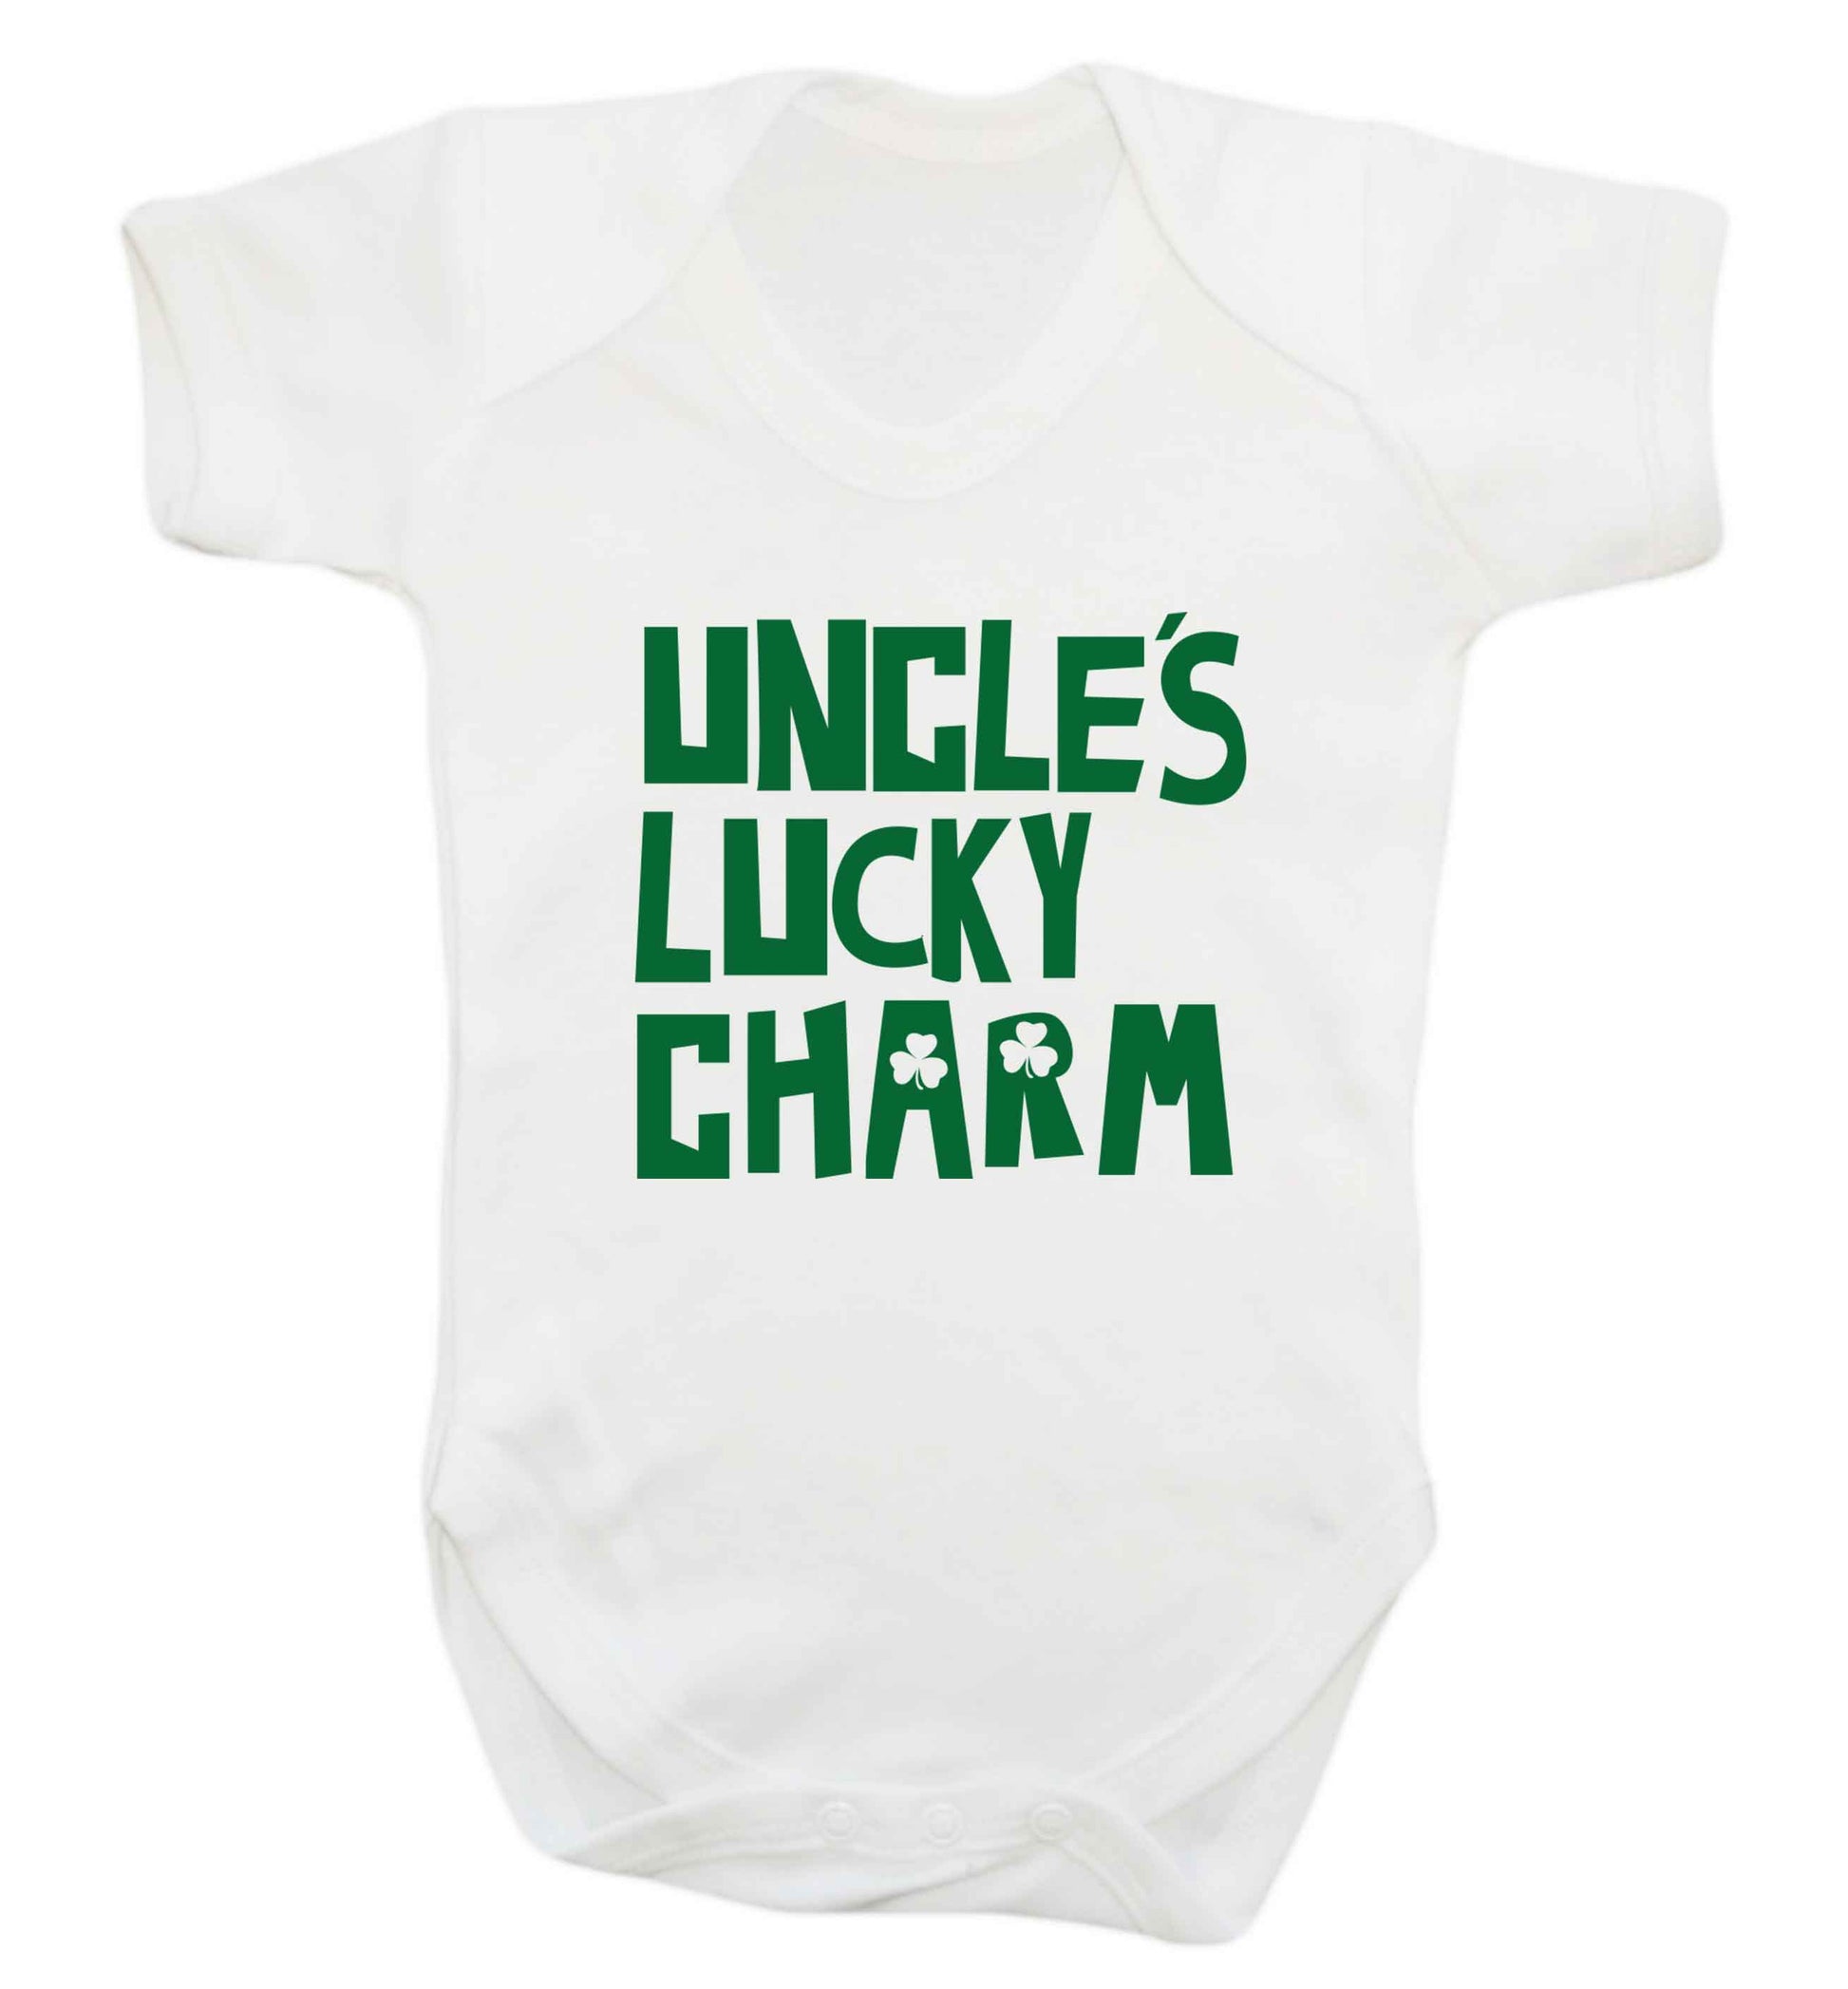 Uncles lucky charm baby vest white 18-24 months